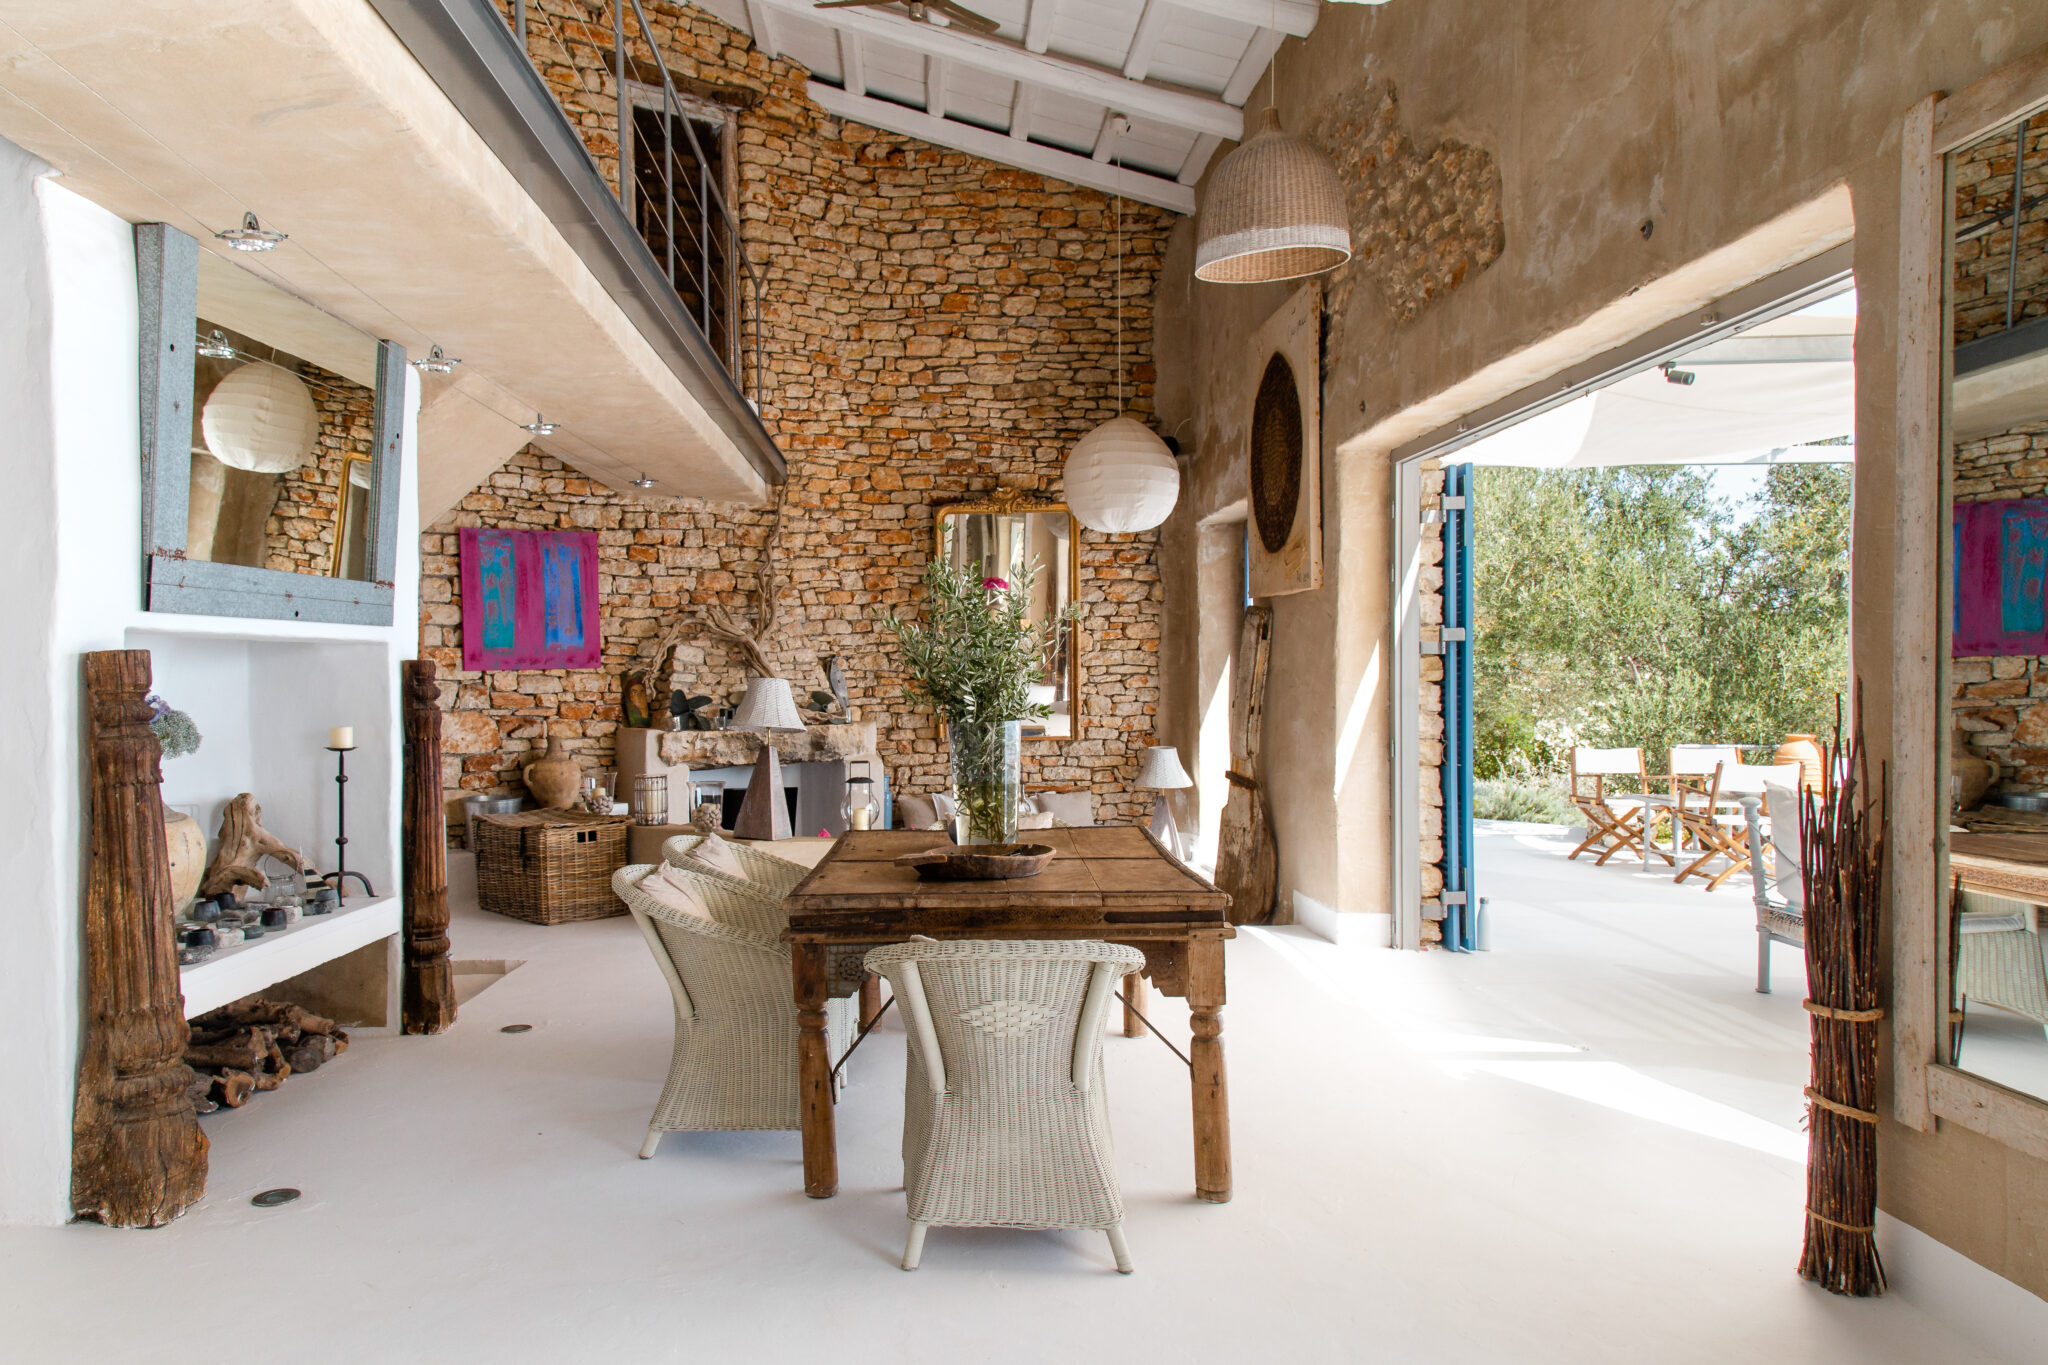 A double height exposed stone living space with rustic Bohemian furnishings